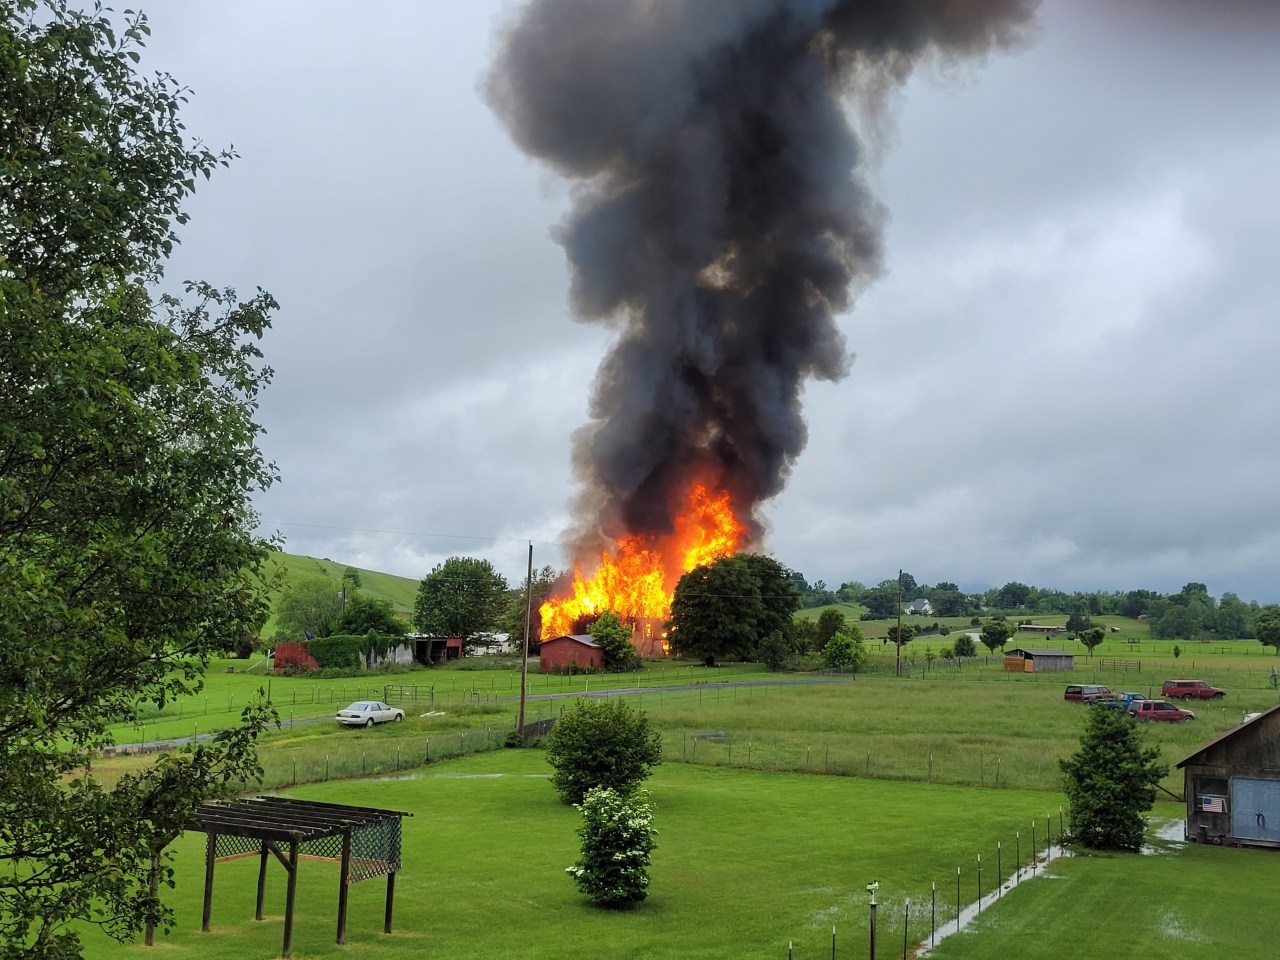 VIDEO: Fully engulfed barn fire in Limestone prompts multi-agency response | WJHL [Video]